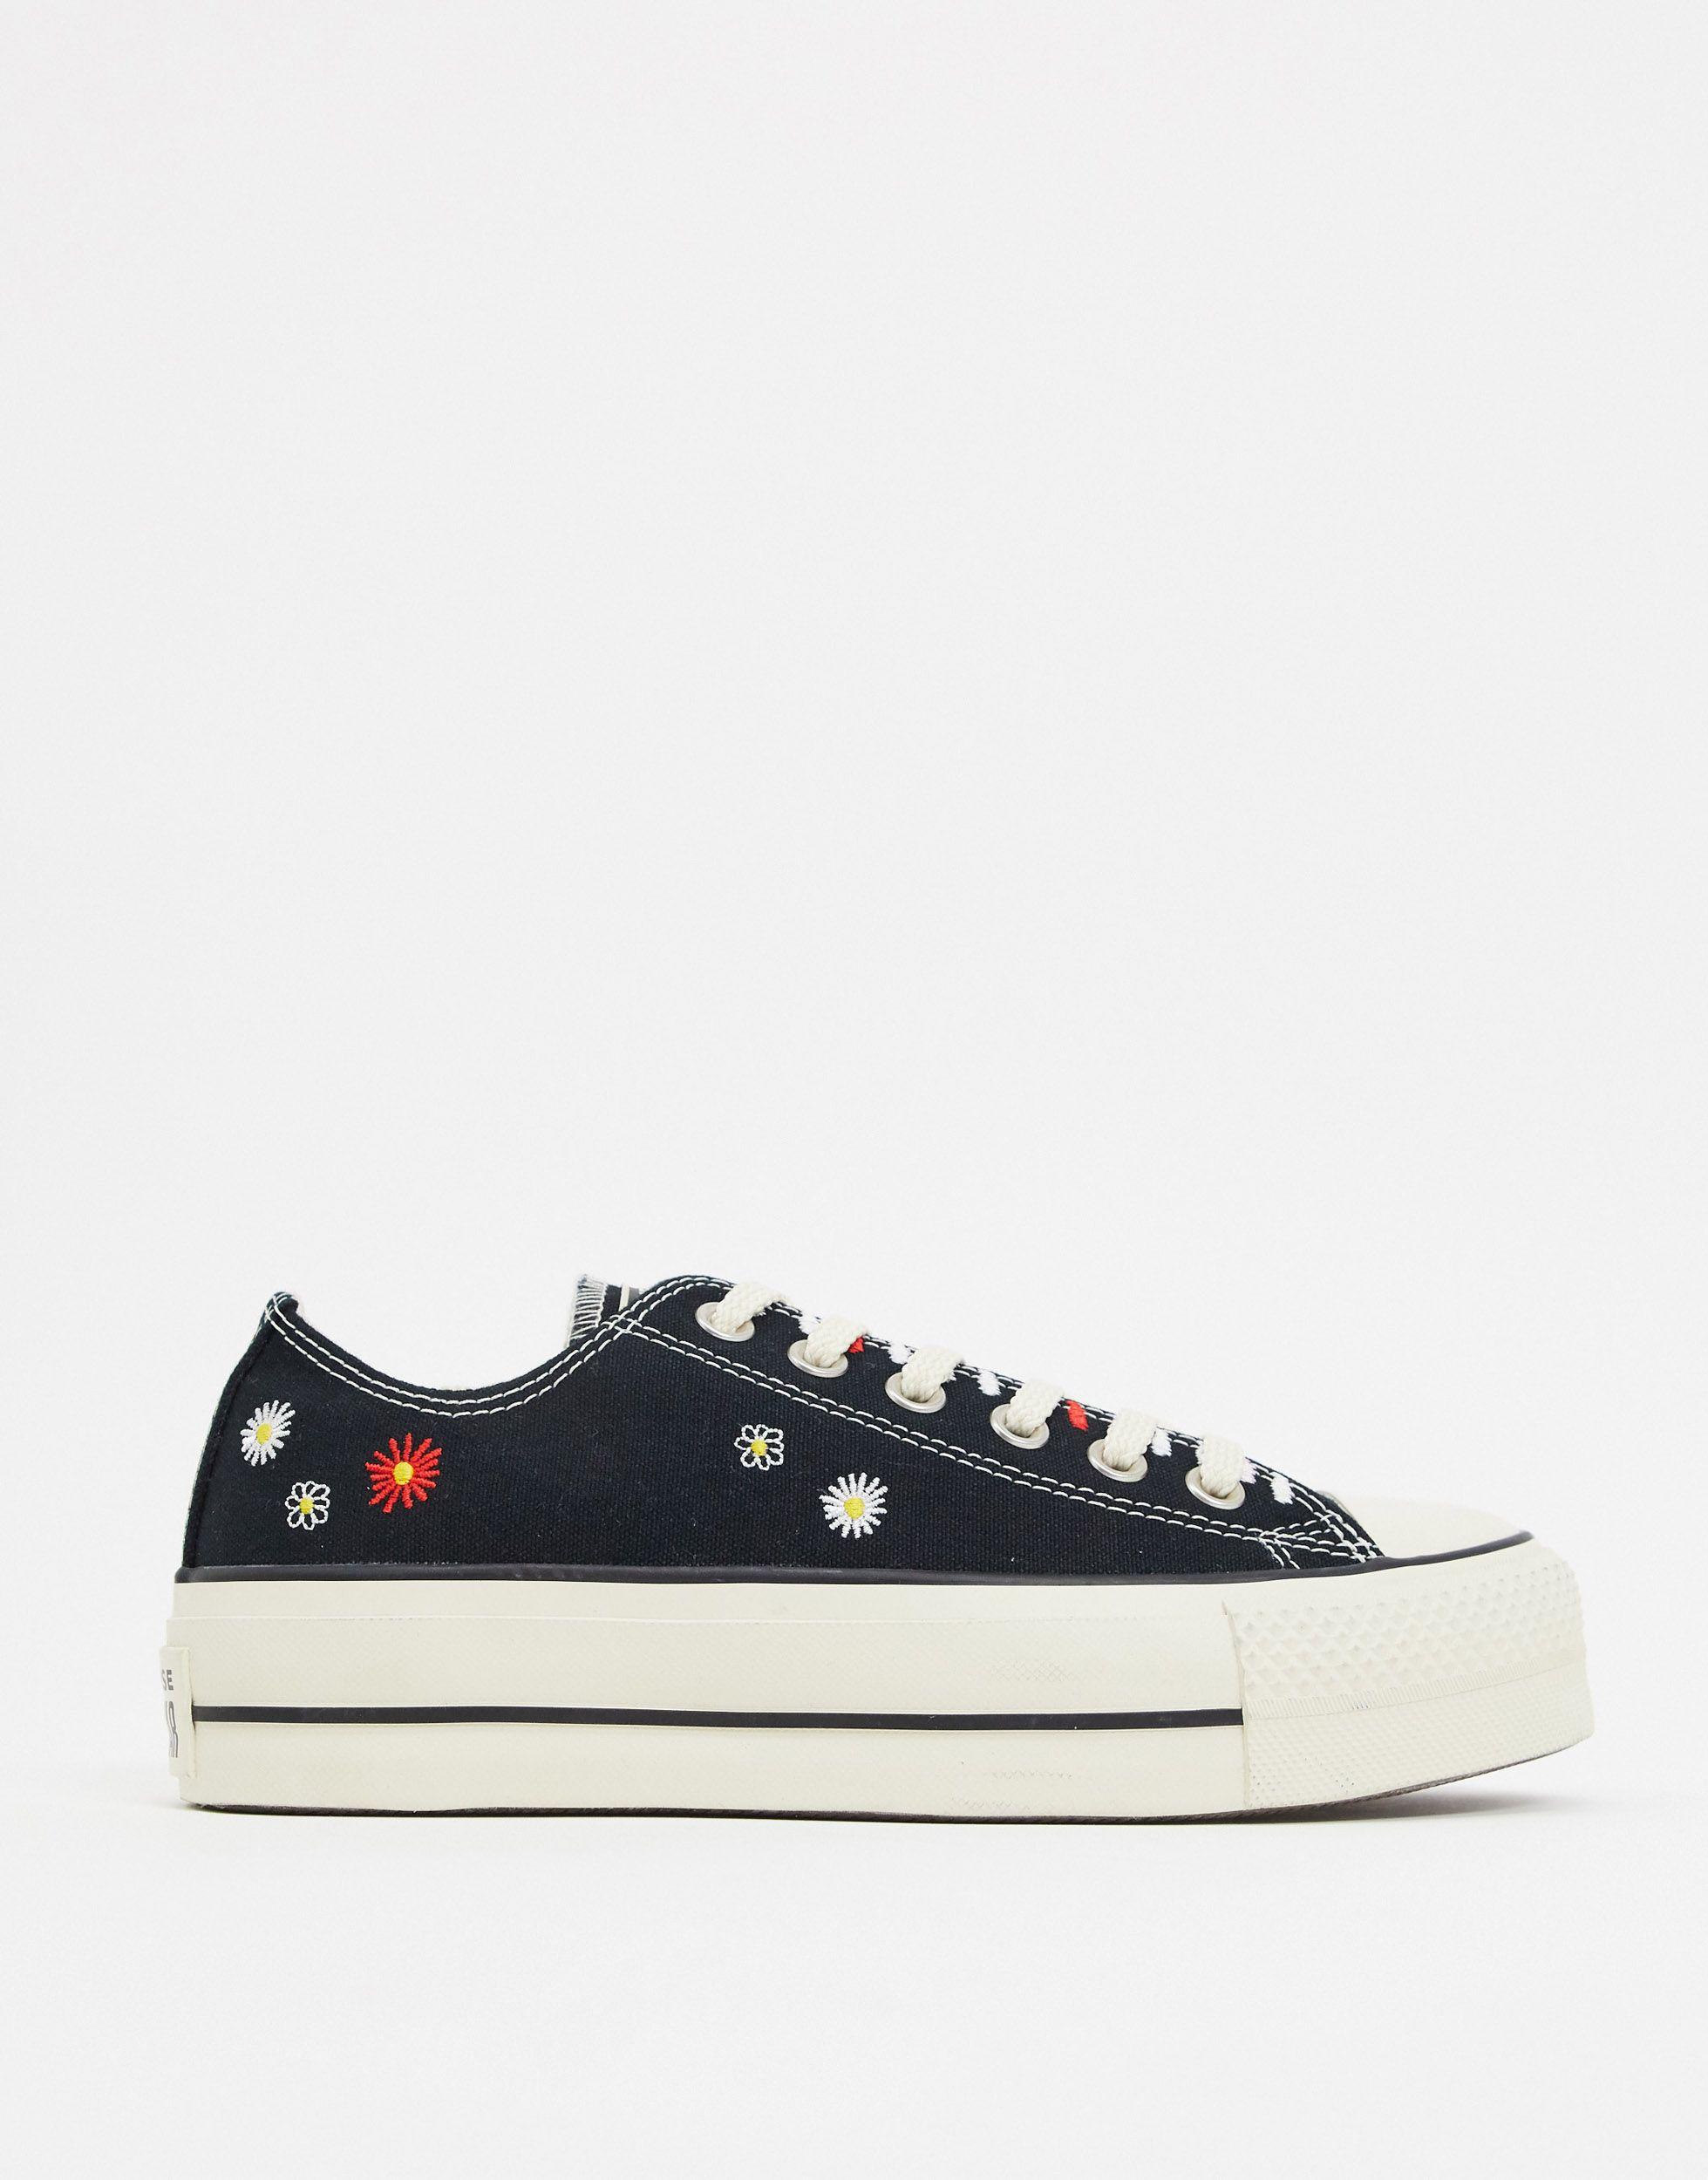 Converse Chuck Taylor Lift Platform Black Embroidered Floral Sneakers | Lyst